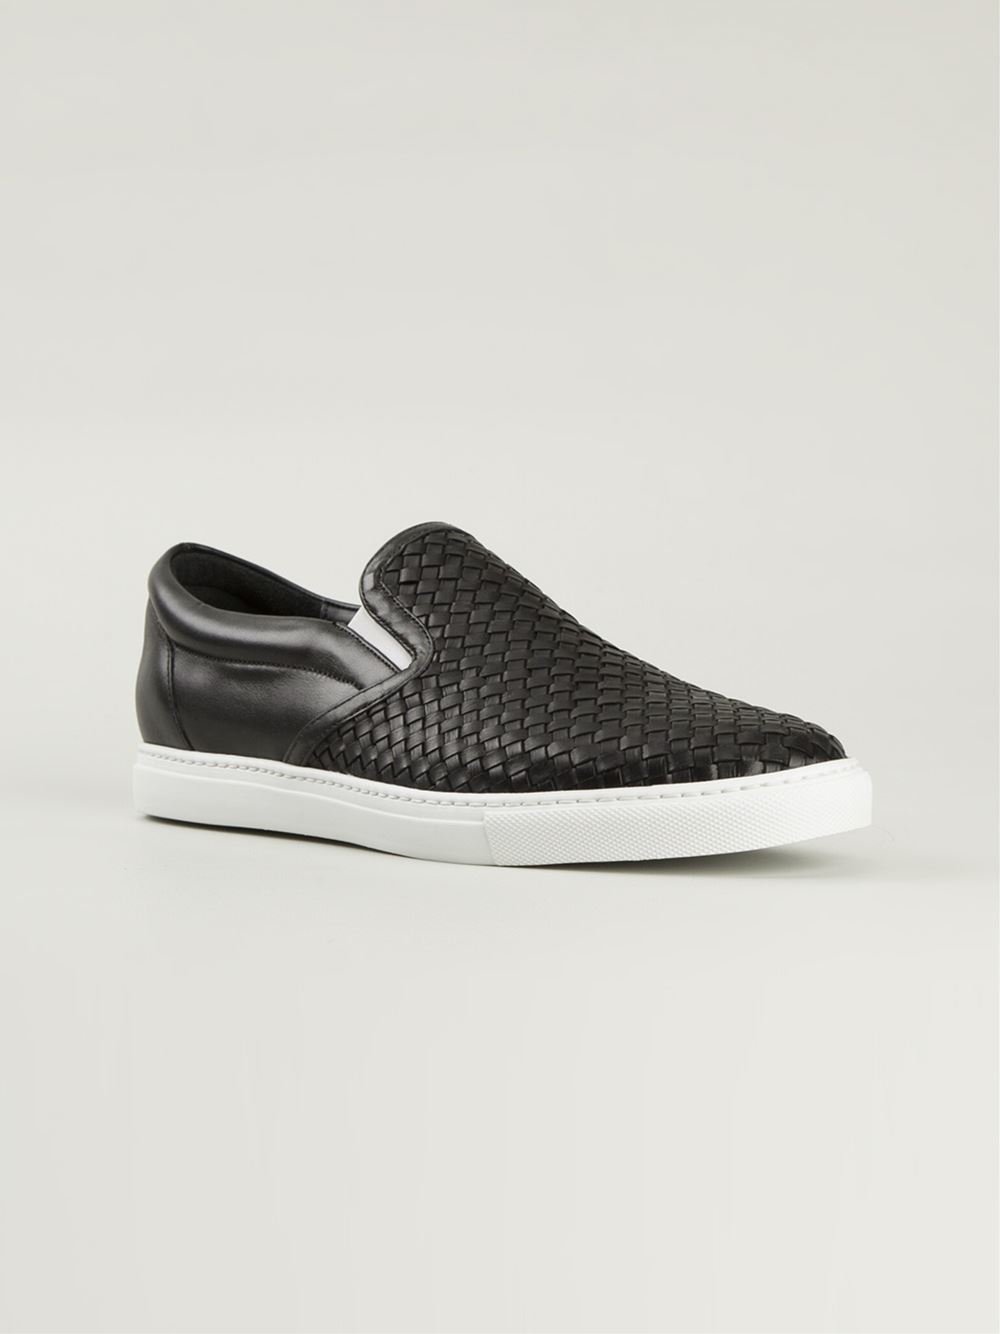 dsquared slip on sneakers